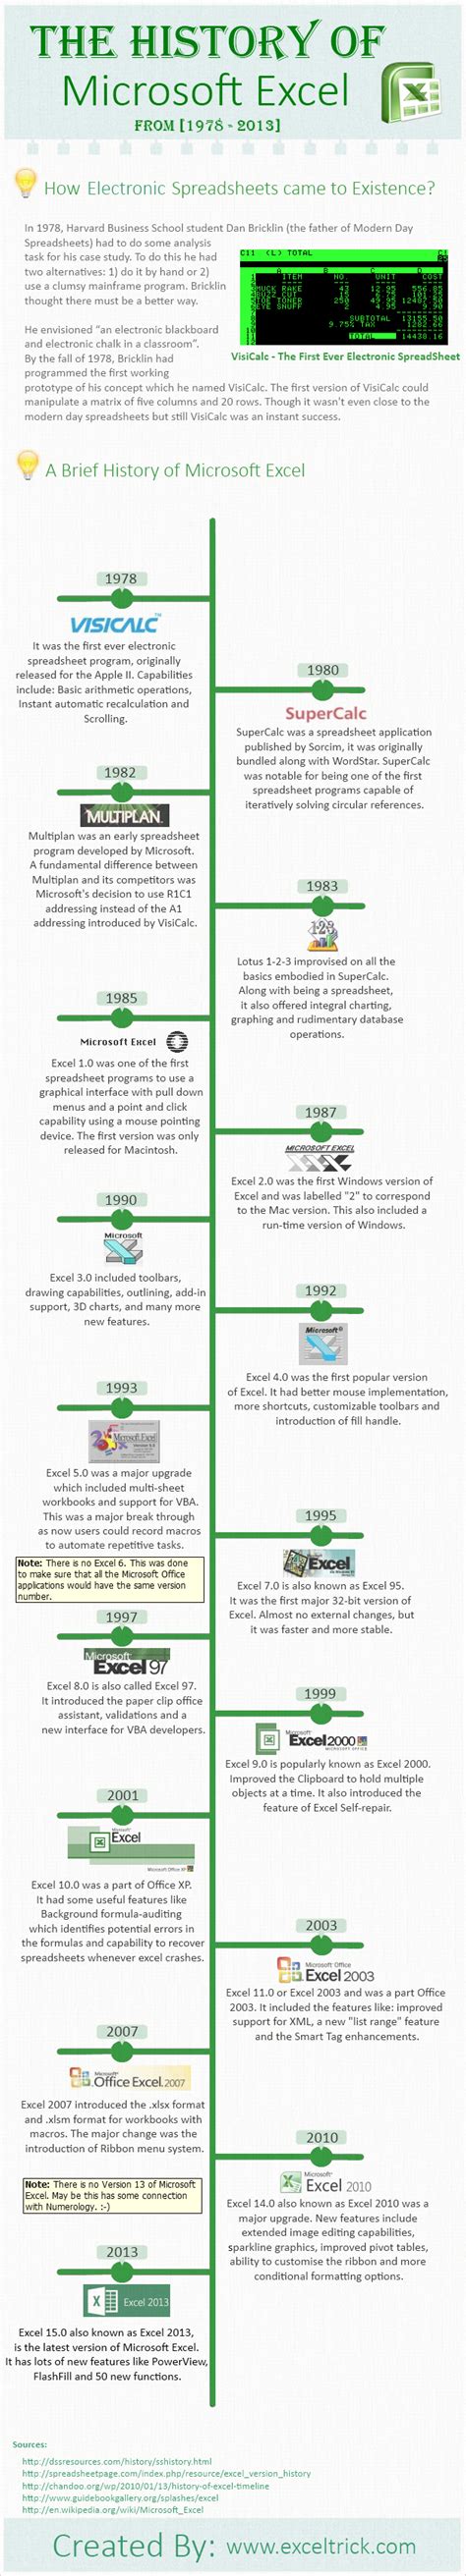 History Of Microsoft Excel 1978 2013 Infographic